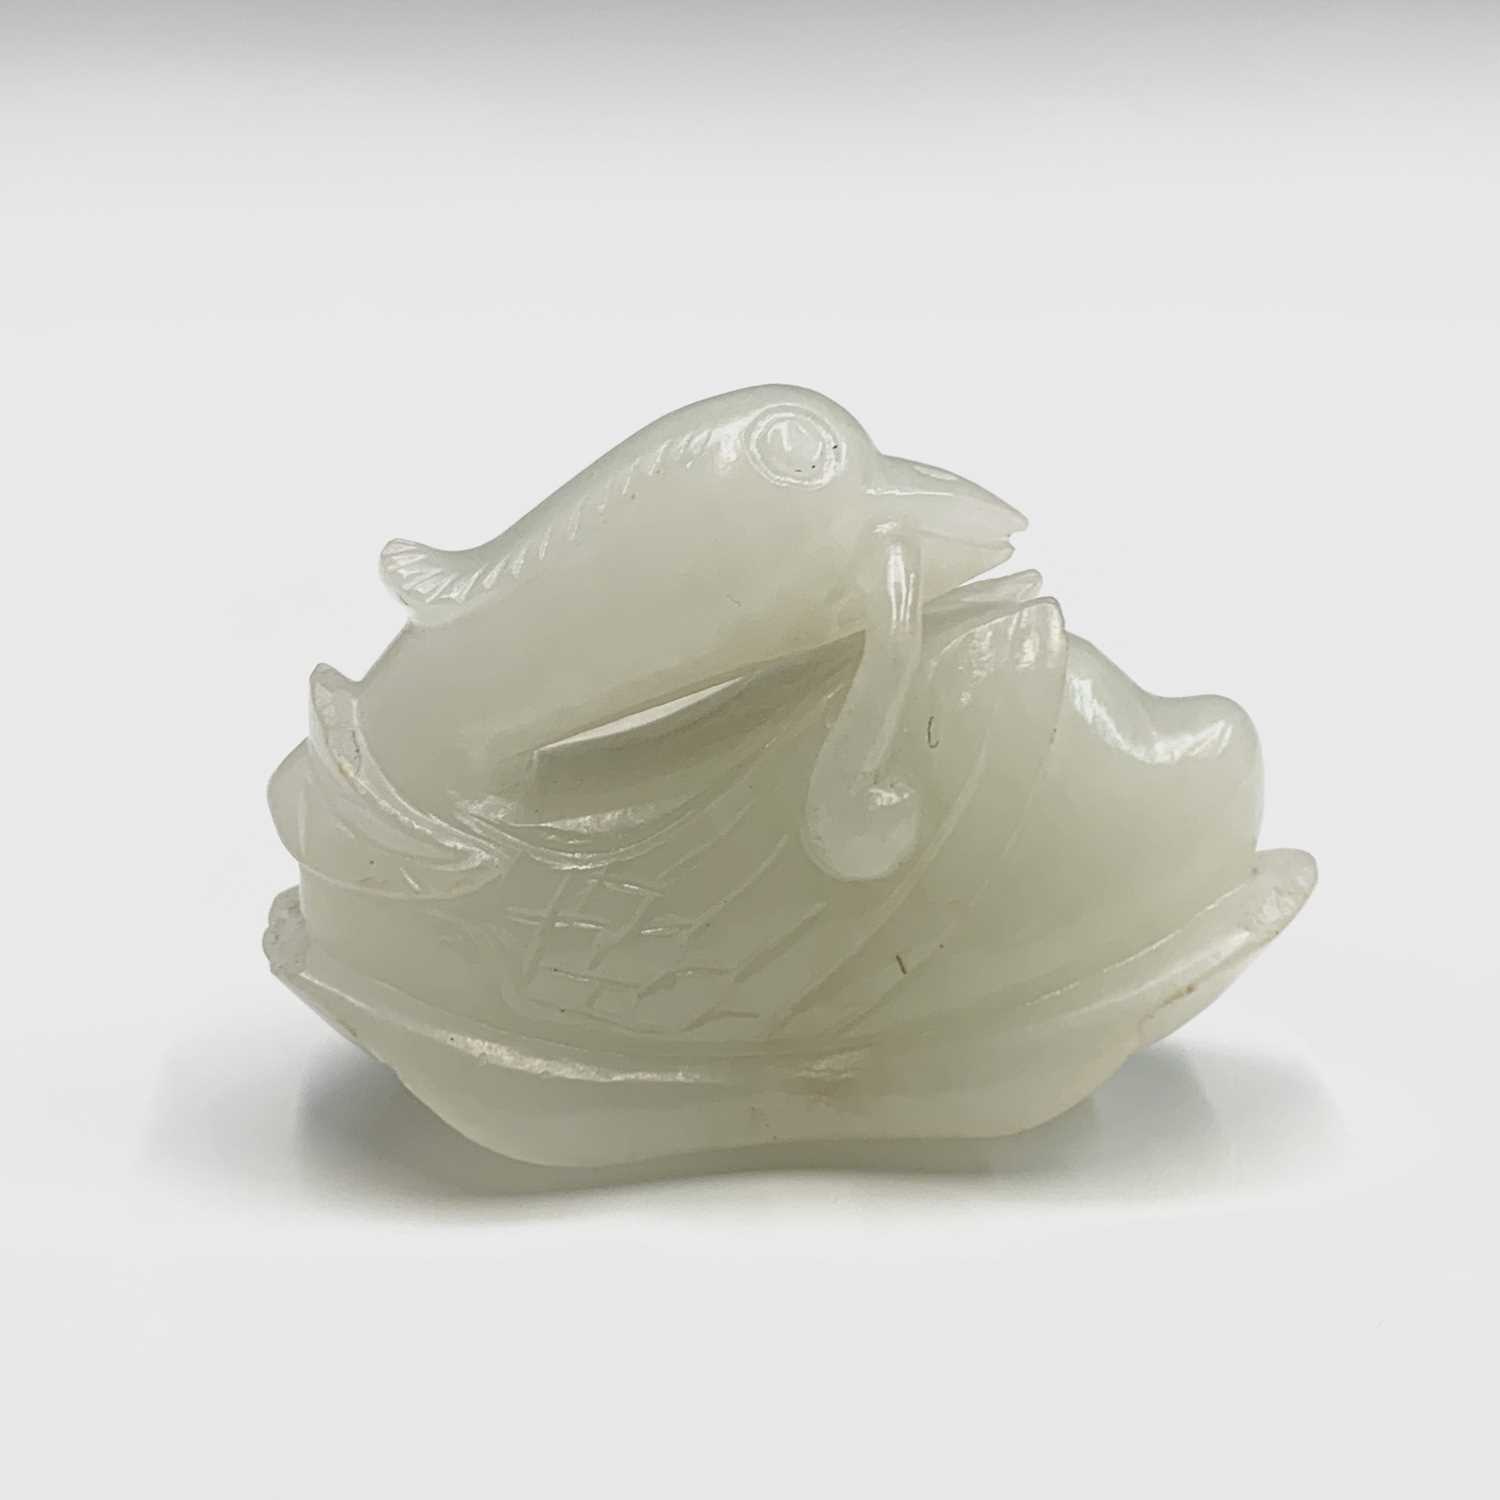 A small Chinese white jade carving of a duck, Qing dynasty, 19th century, height 3cm, width 4.5cm. - Image 8 of 11